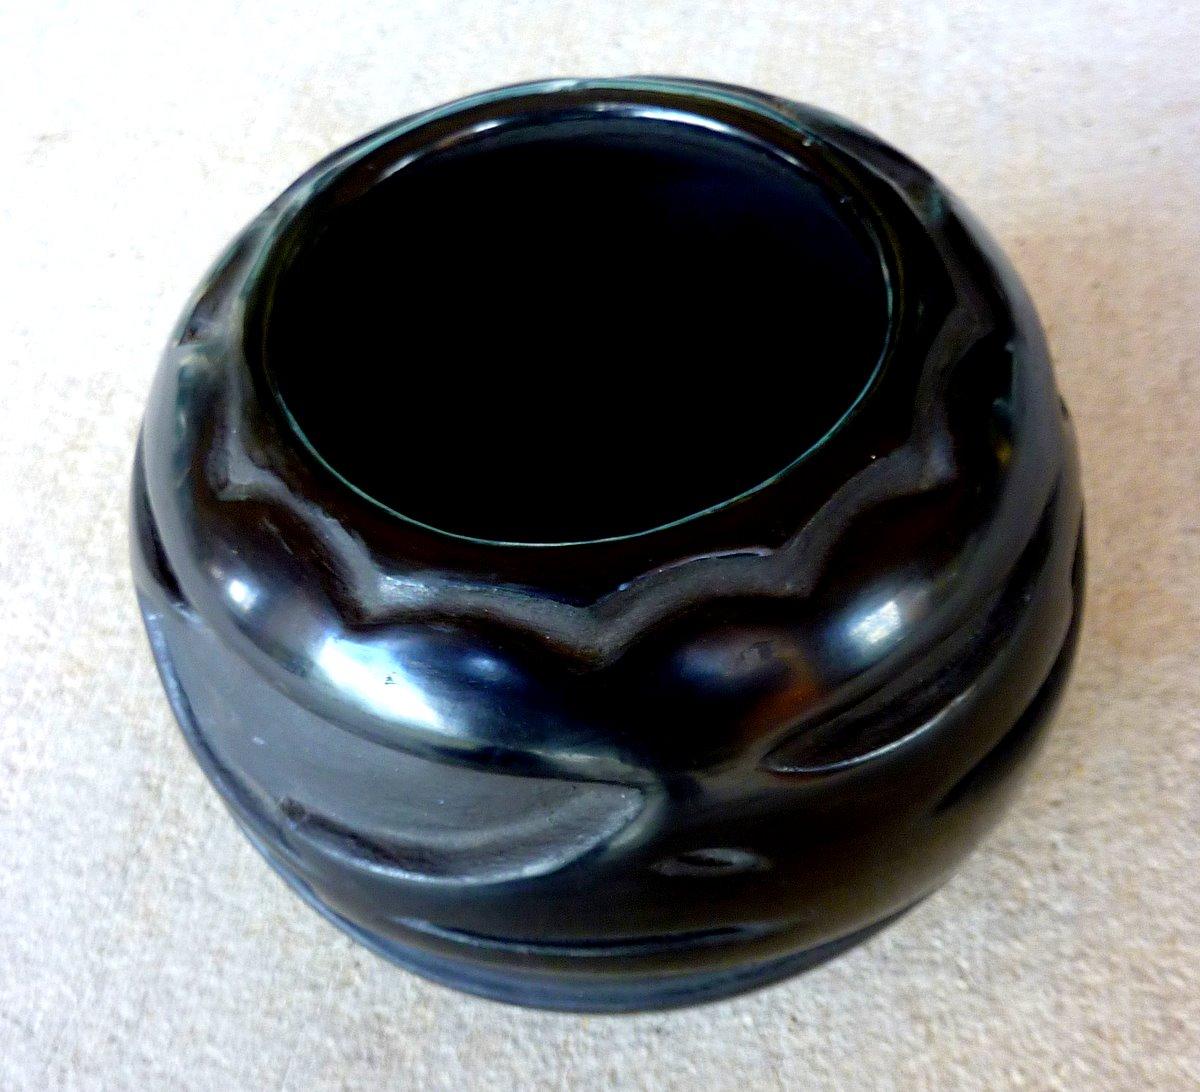 An exceptional Santa Clara Pueblo blackware vase by John Vigil. Signed.

A few important notes about all items available through this 1stdibs dealer:

1. We list all our items as being in 